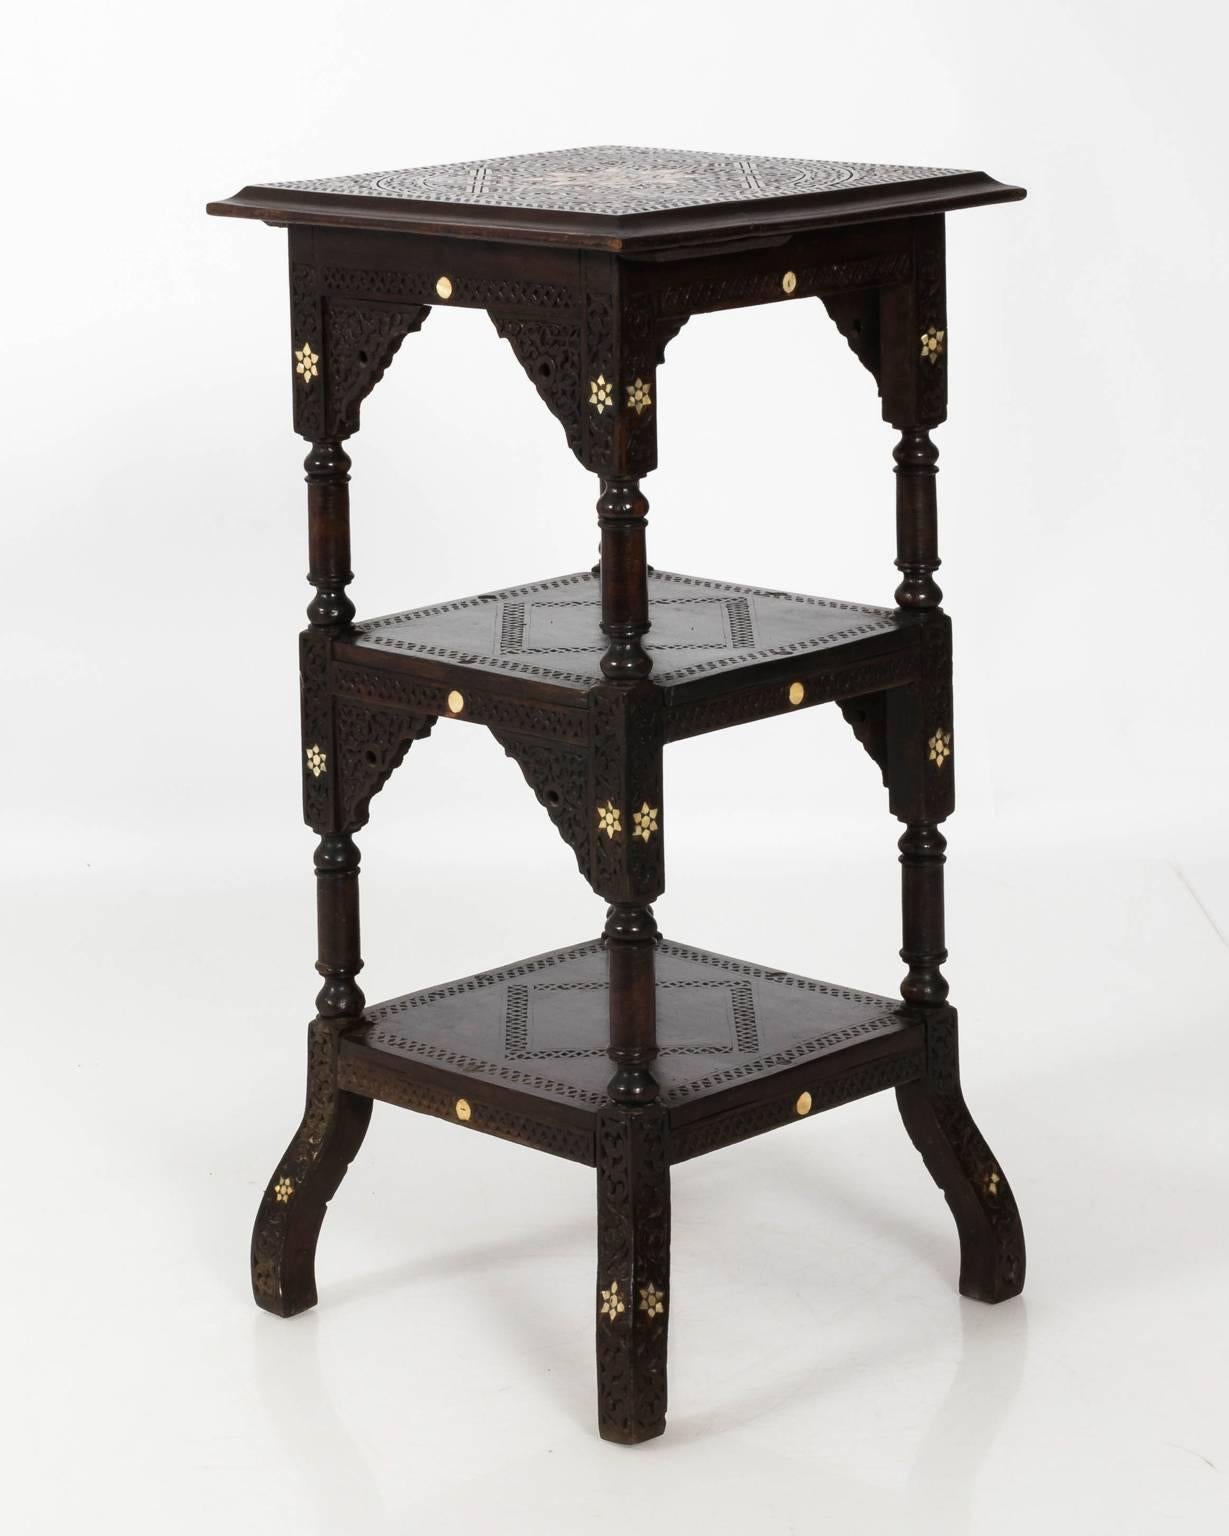 Hand-carved walnut wise table from Syria with geometric mother-of-pearl inlay with three tiers, circa early 20th century. This table also features decorative floral. Carvings throughout with Arabesque arches.